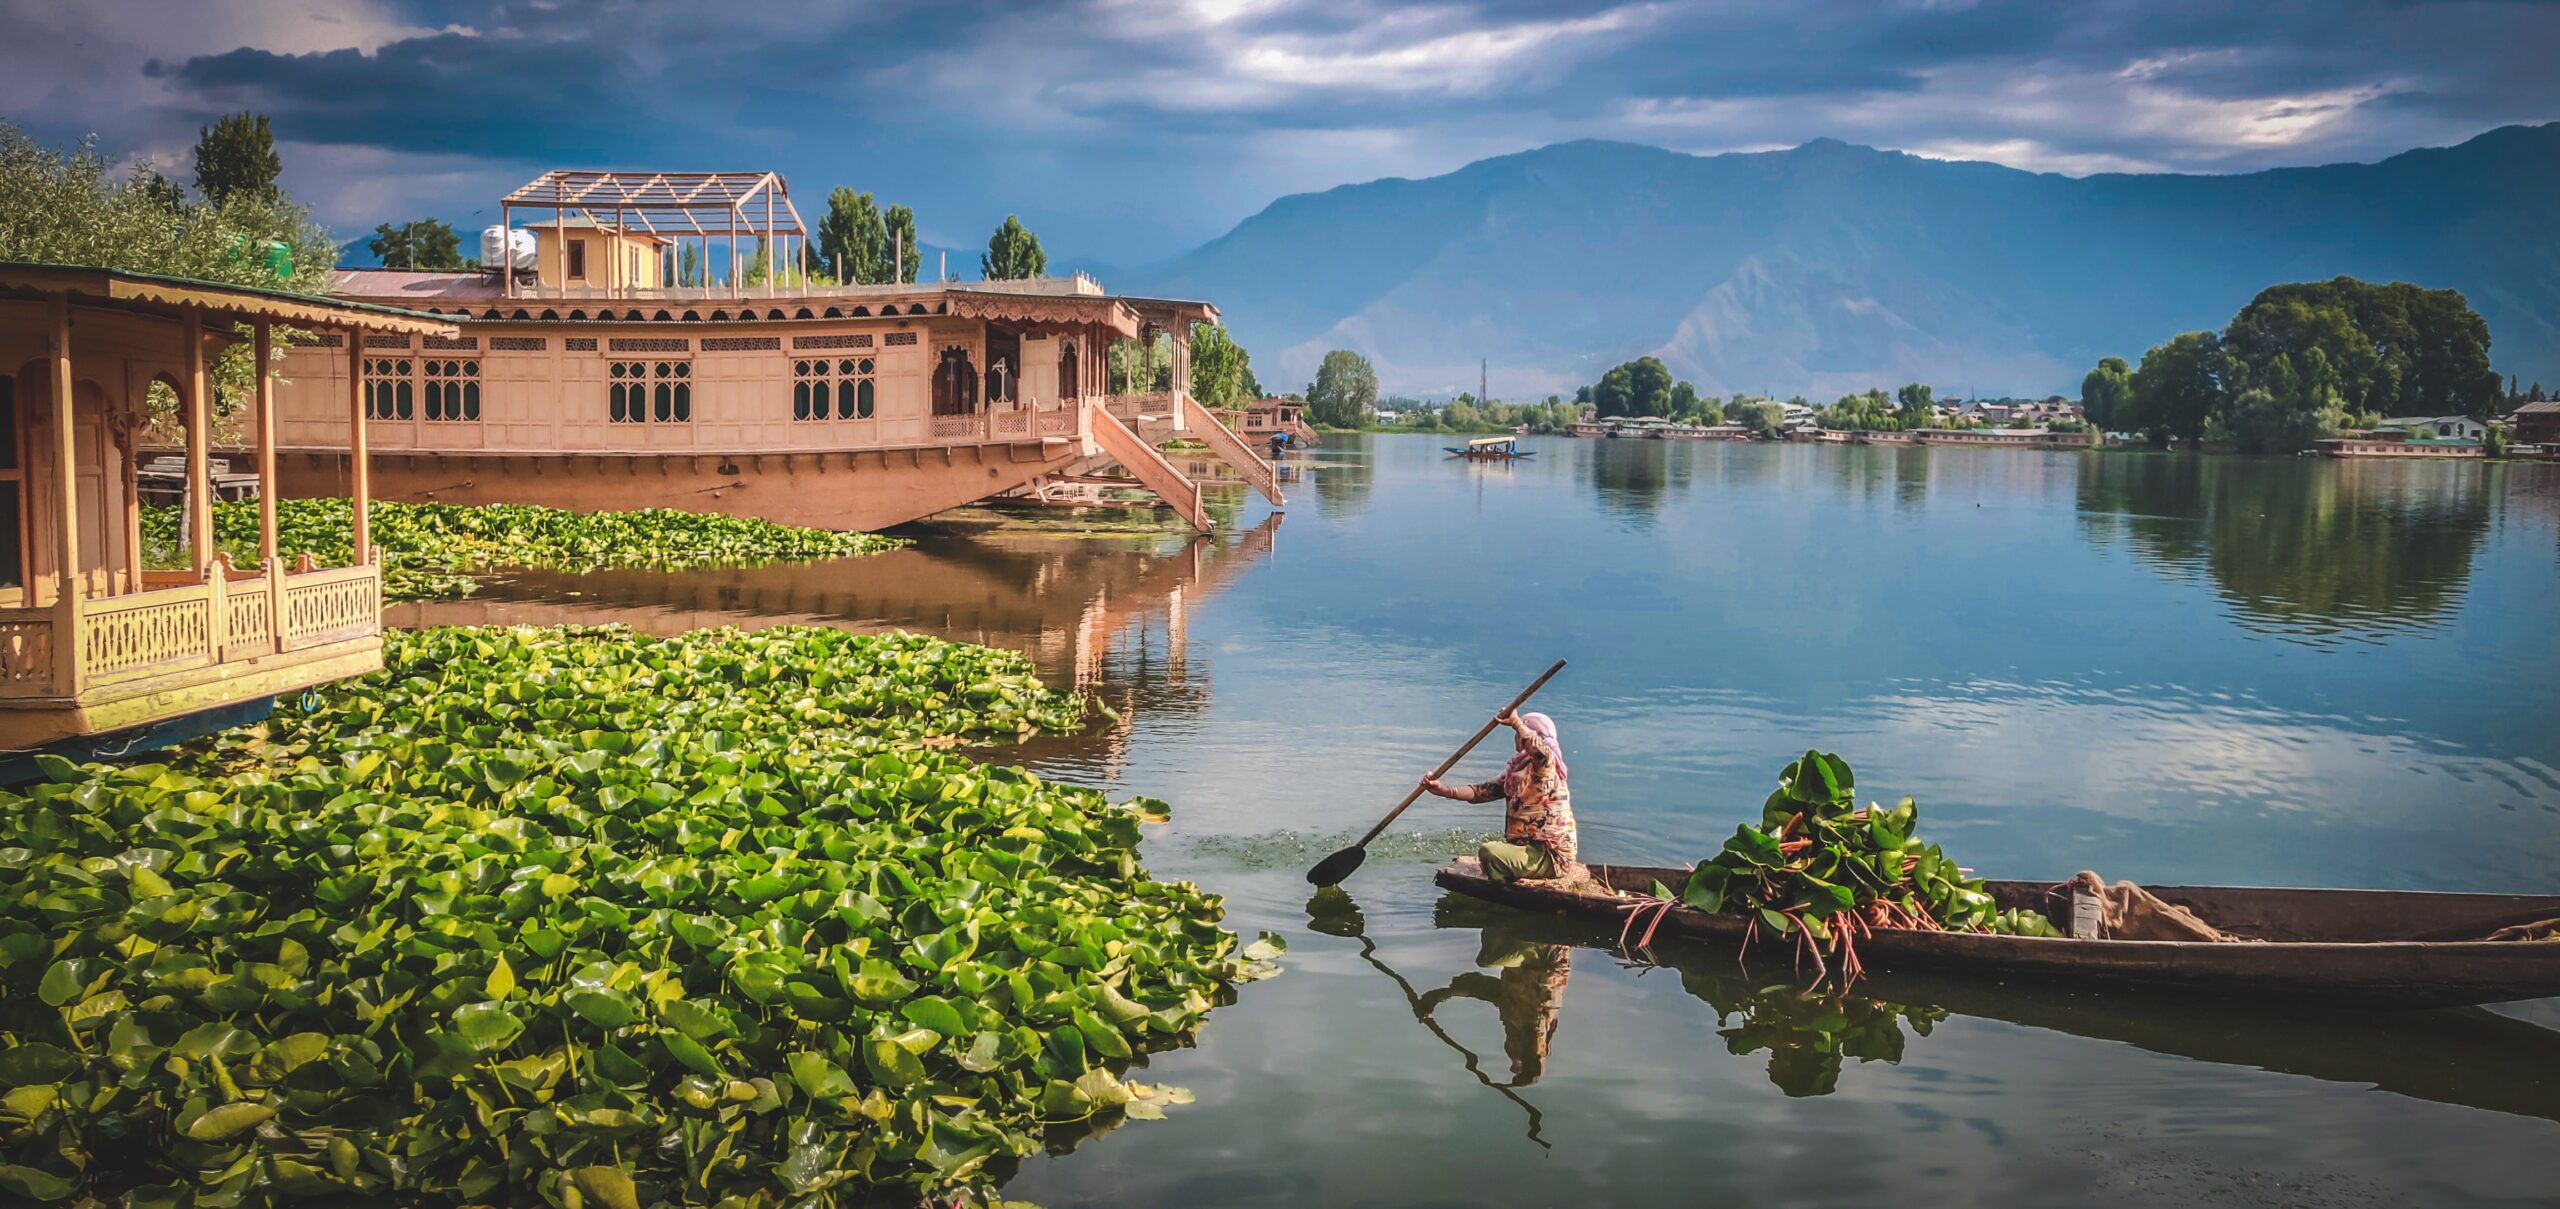 All Must Know Information About Srinagar Jammu Before Travelling